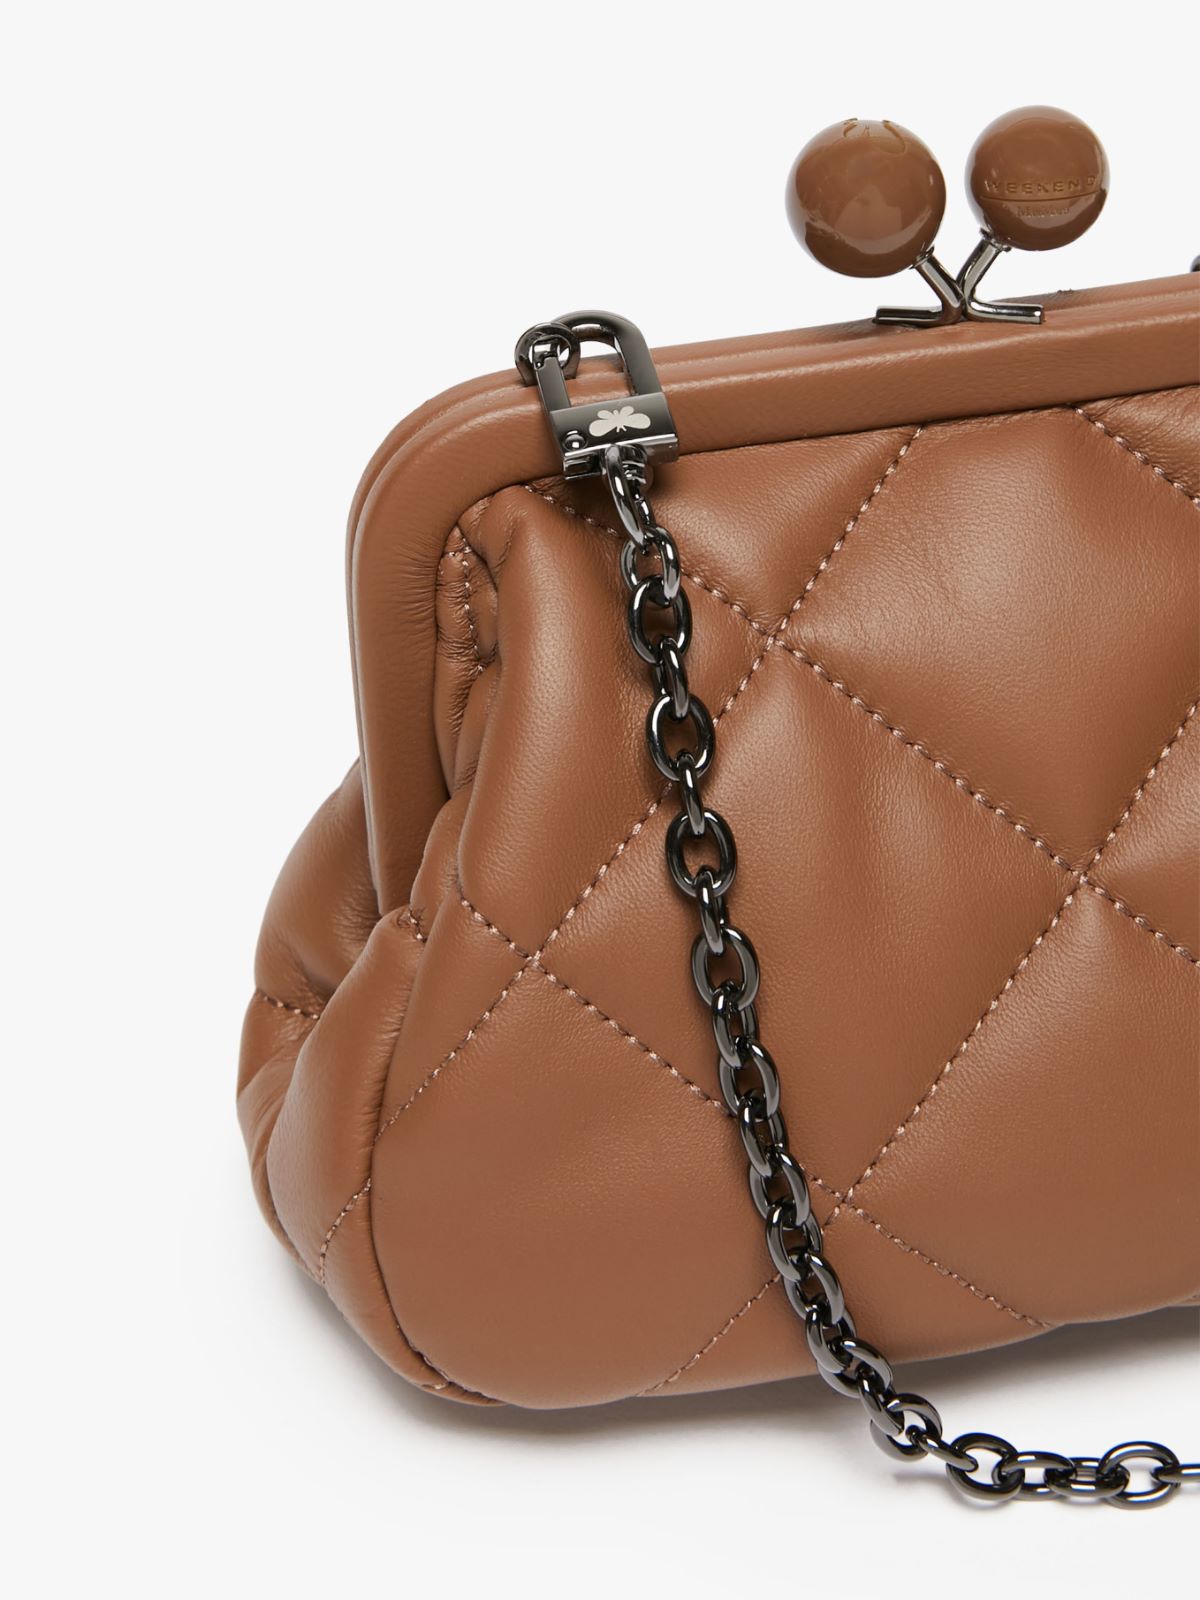 Small Pasticcino Bag in nappa leather - BROWN - Weekend Max Mara - 4